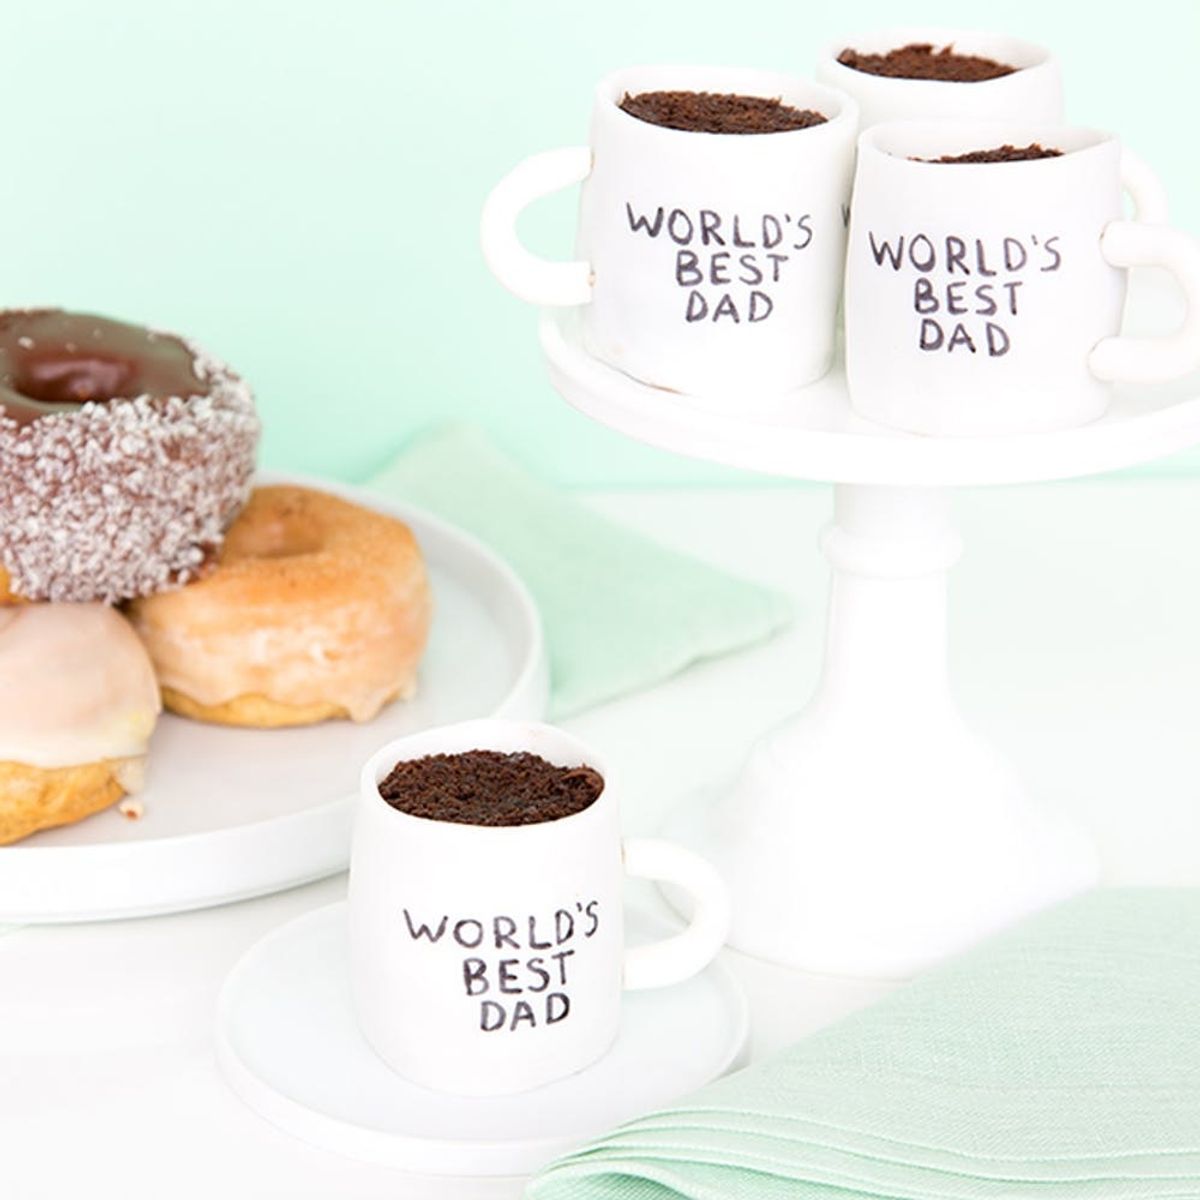 Show Dad He’s the Best This Father’s Day With Mug-Shaped Cupcakes